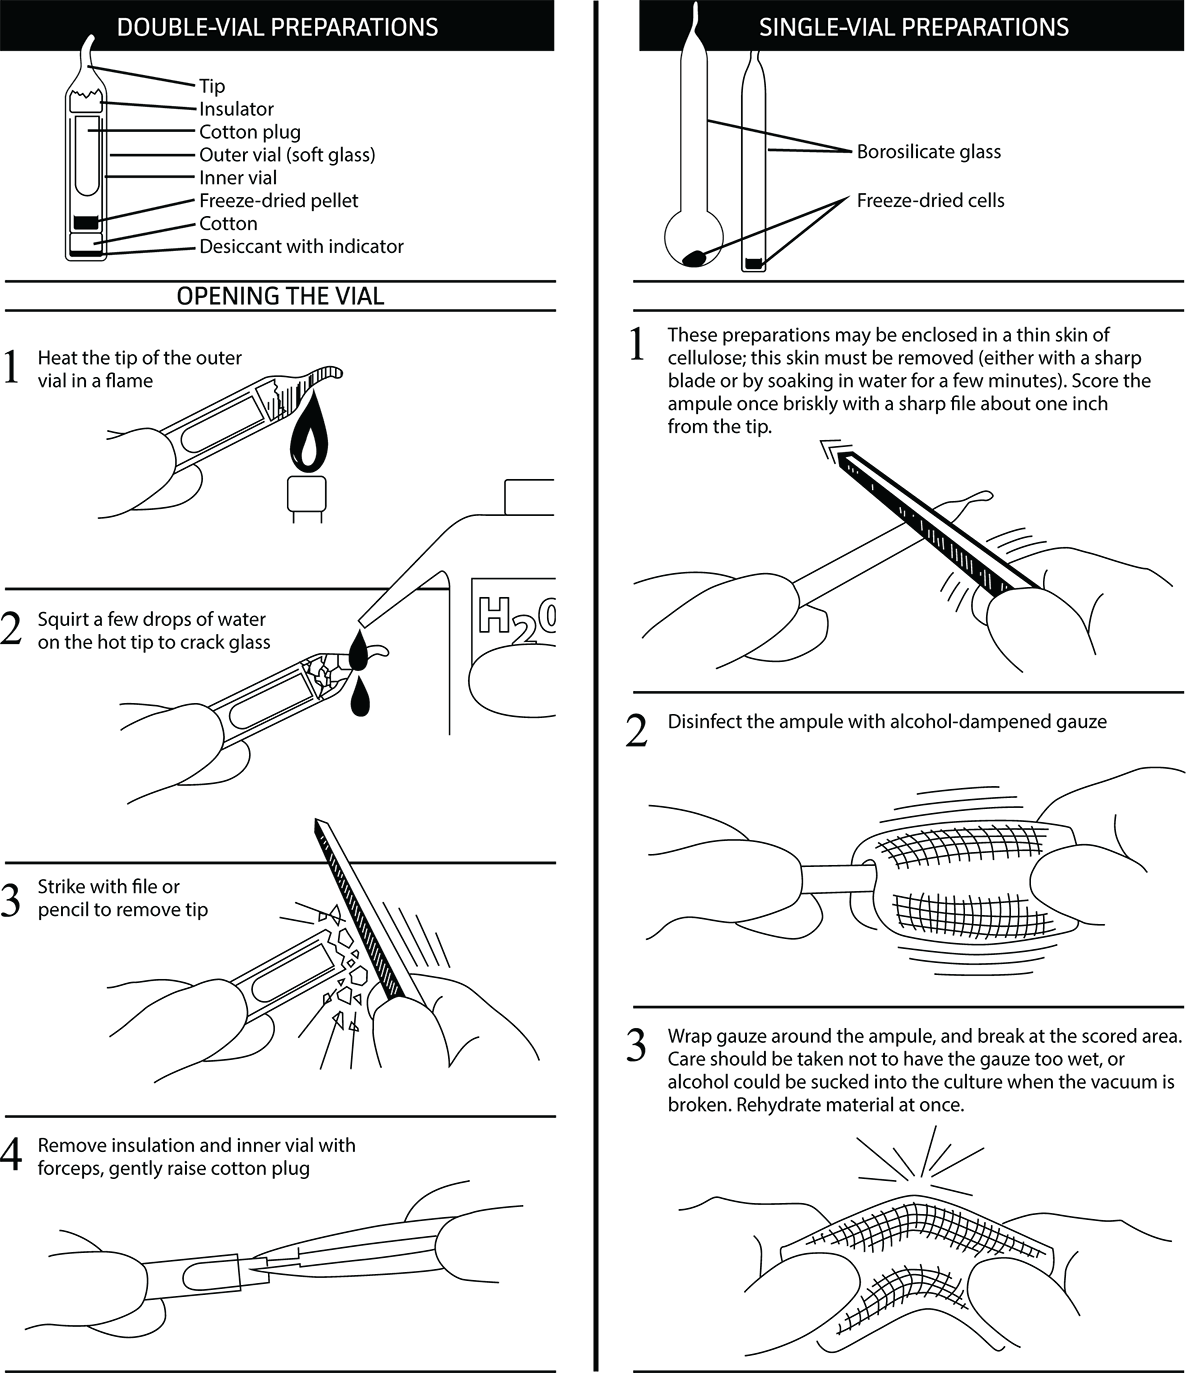 Written and illustrated instructions for double-vial and single-vial preparations.